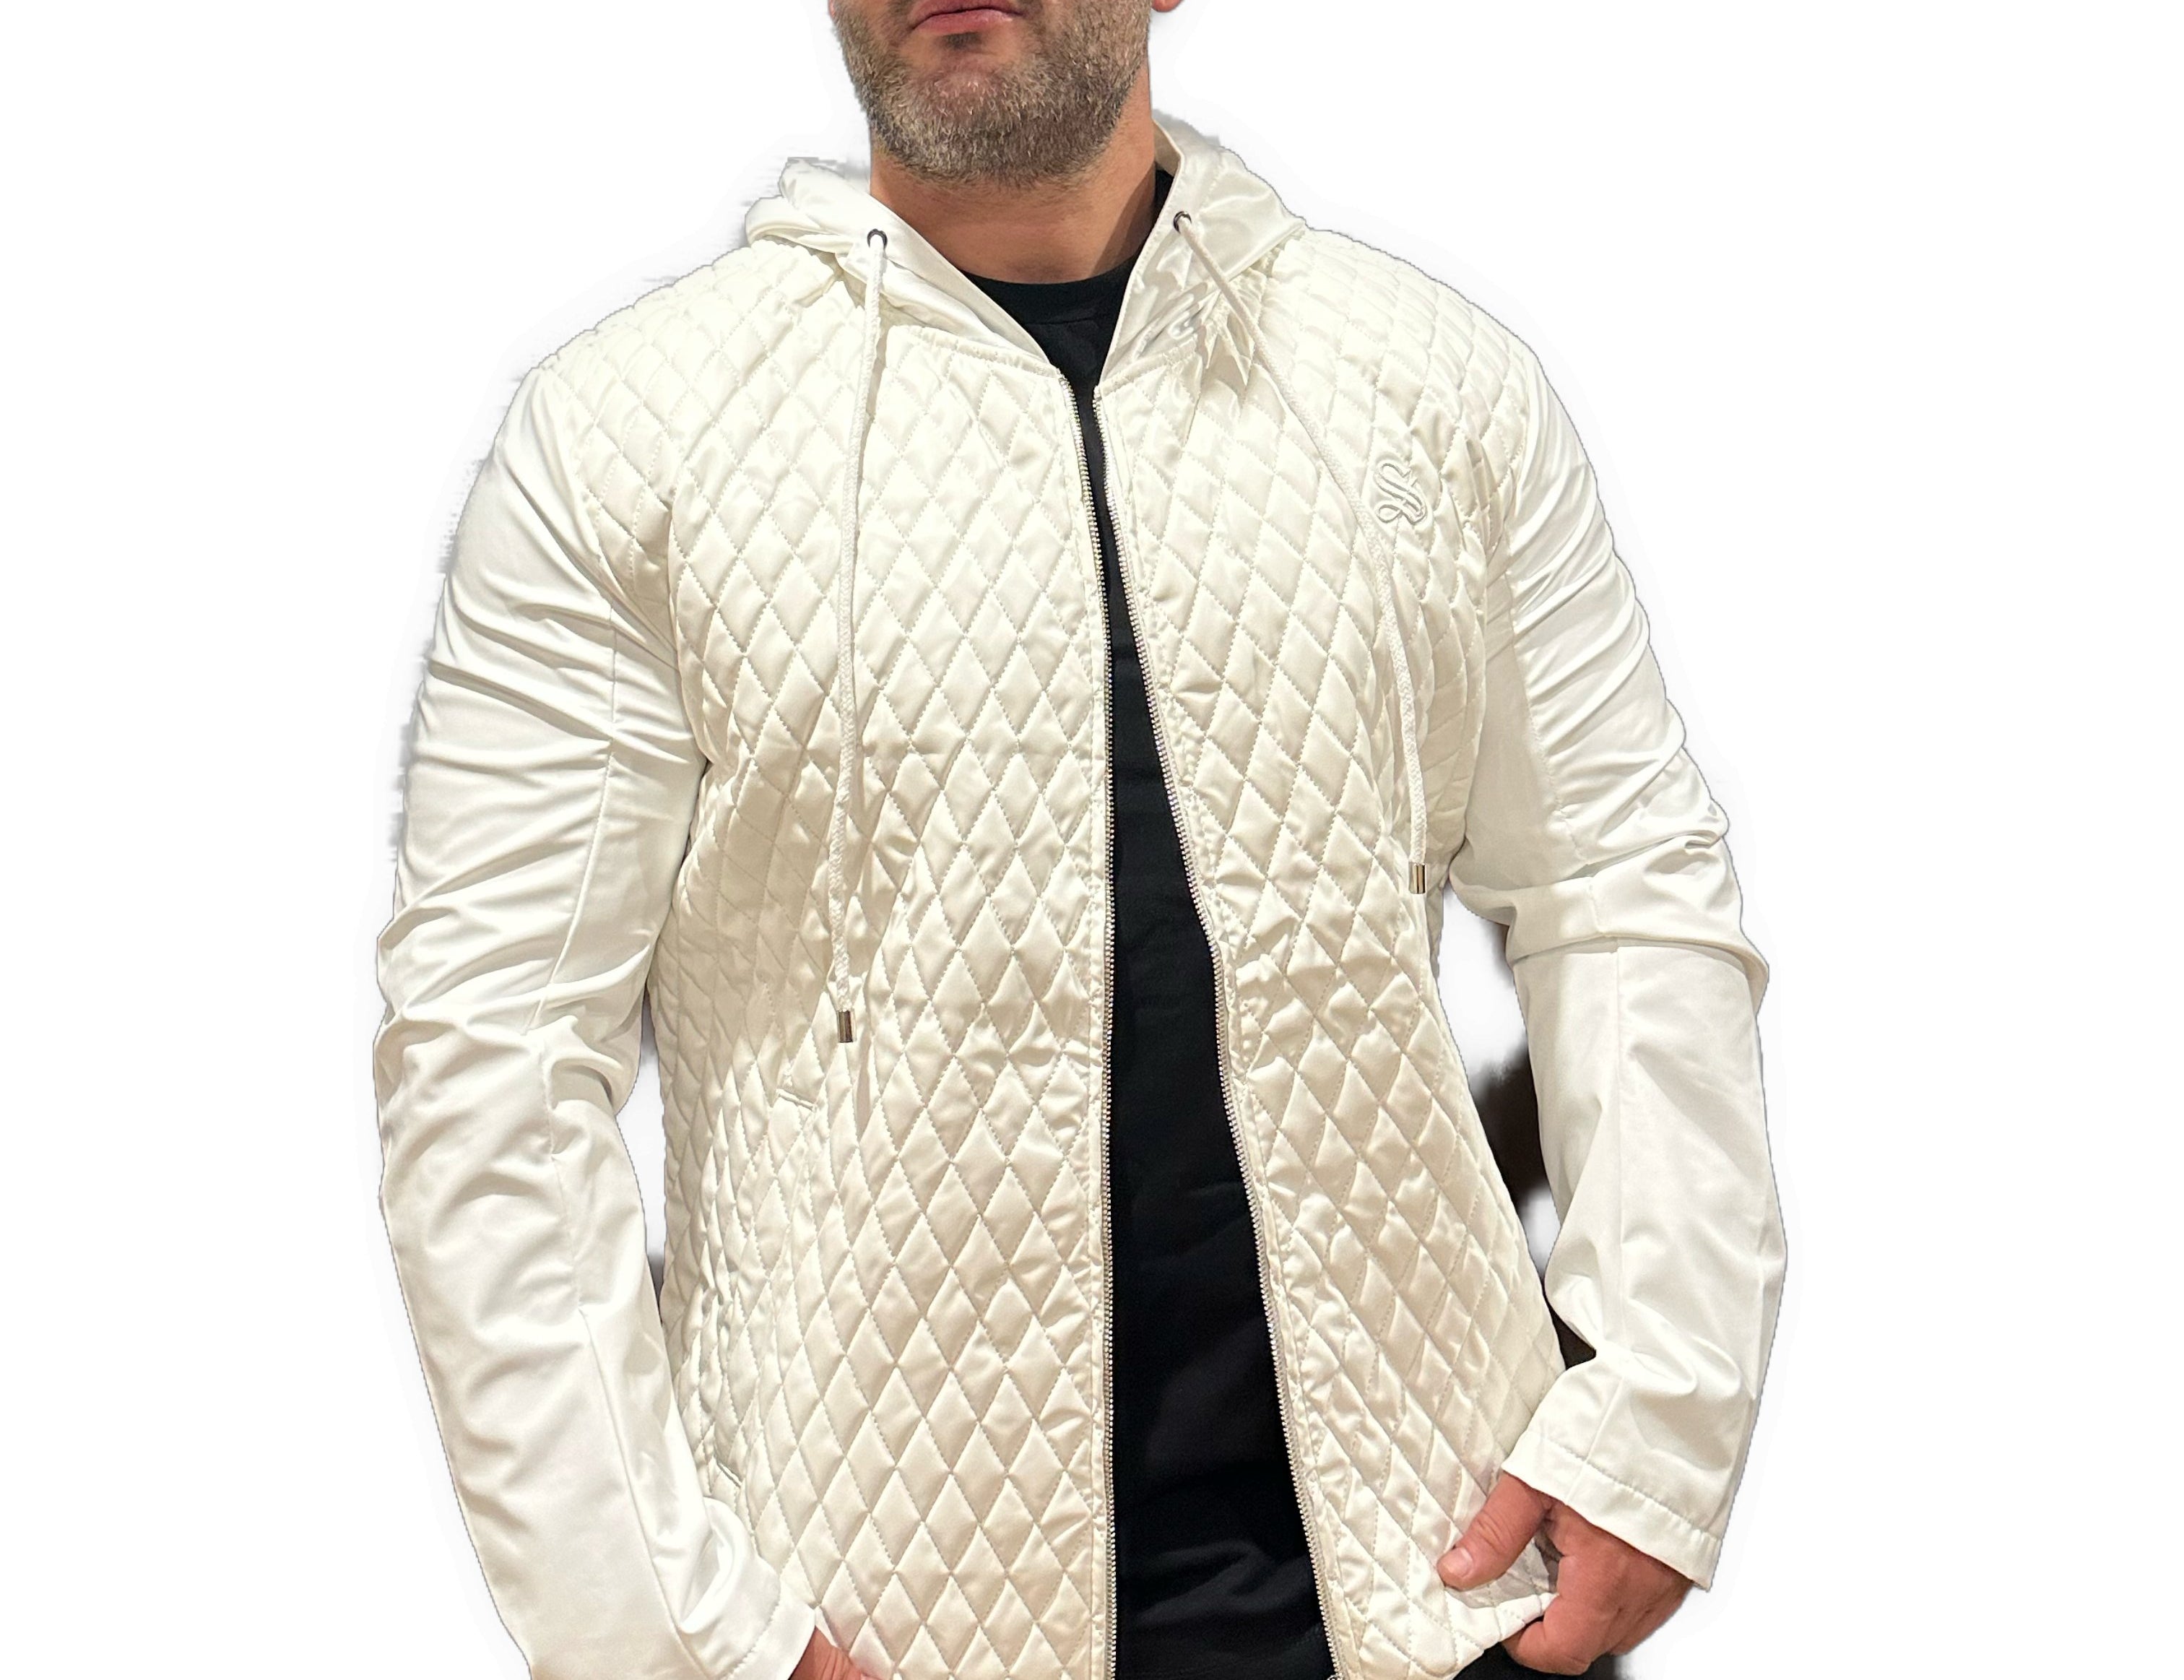 Robin 6 - White Jacket for Men - Sarman Fashion - Wholesale Clothing Fashion Brand for Men from Canada